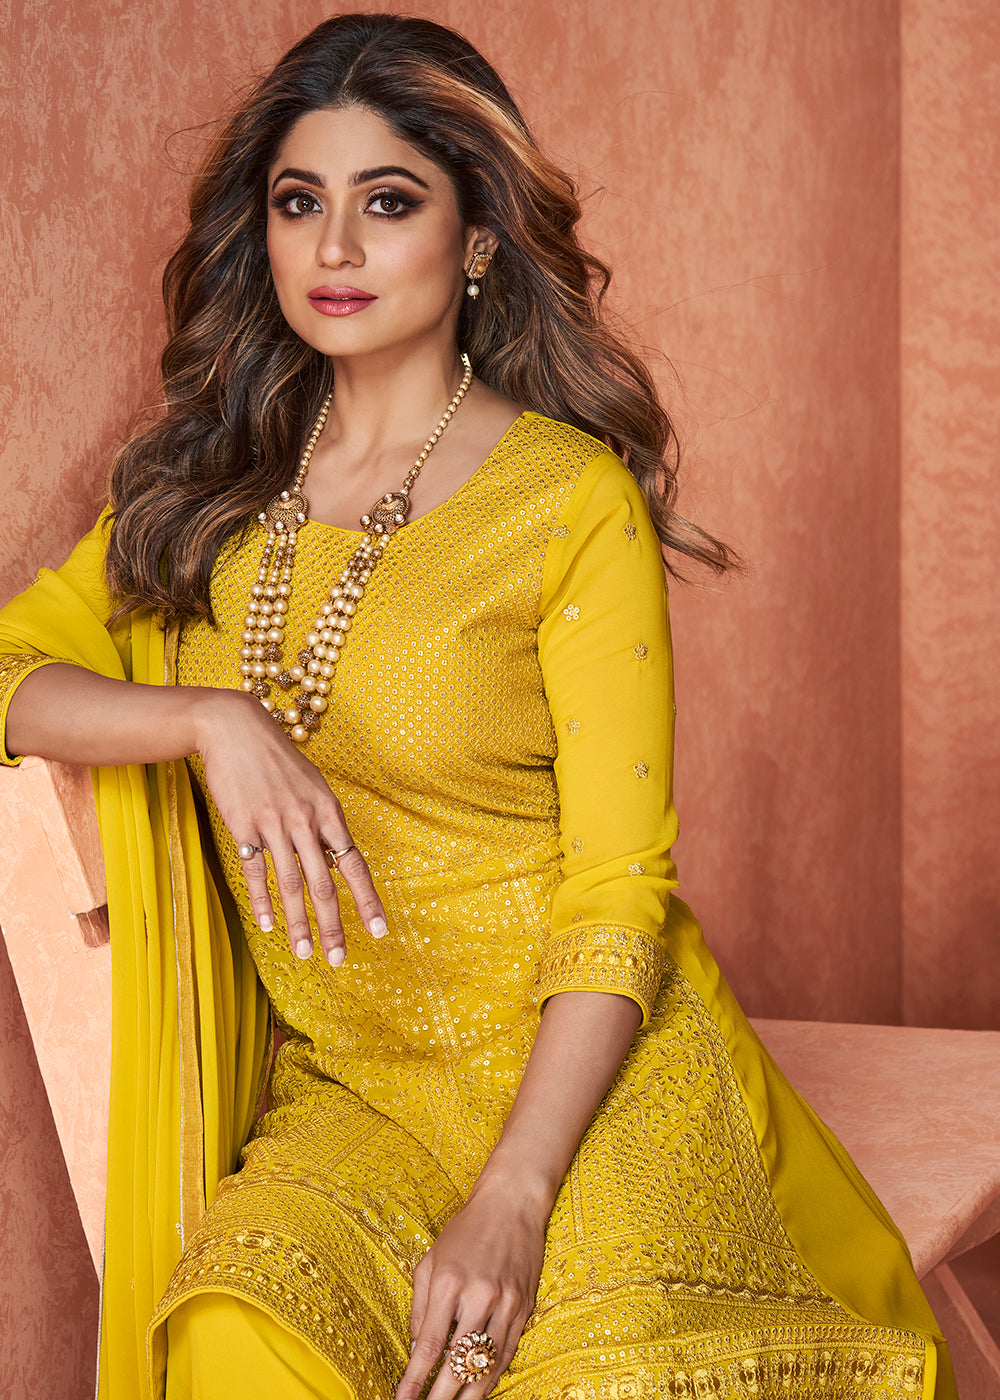 Shop Now Fabulous Yellow Gharara Style Wedding Festive Suit Online at Empress Clothing in USA, UK, Canada & Worldwide. 